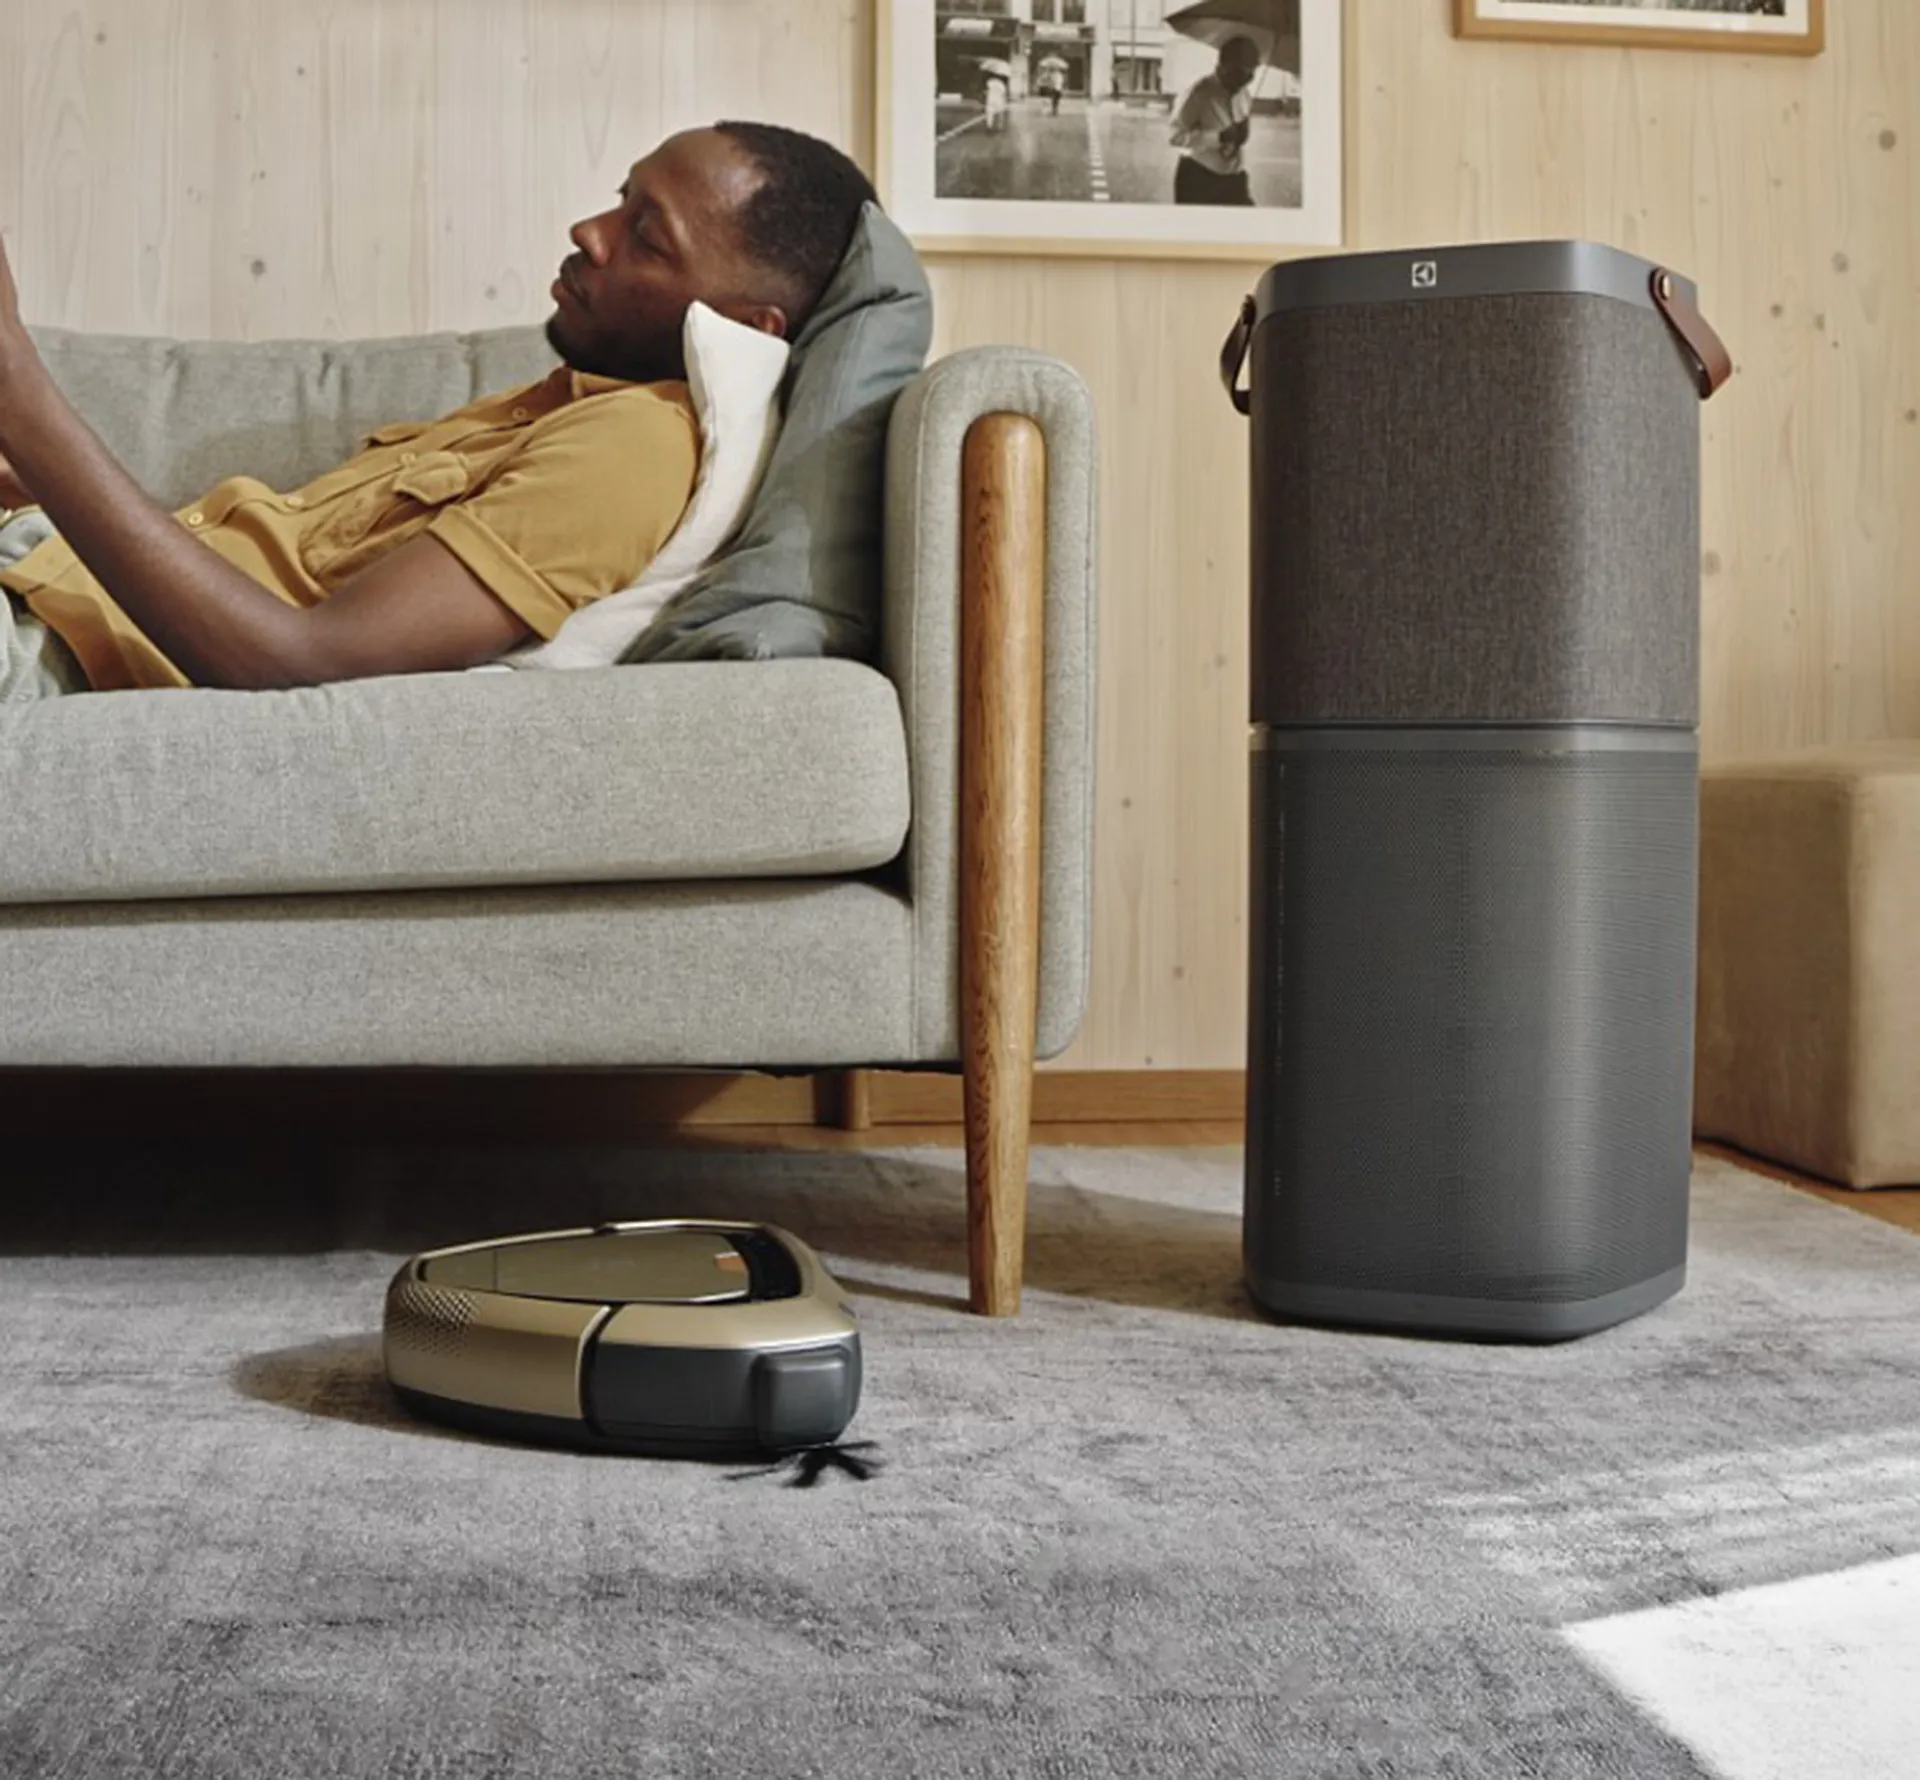 Man relaxing surrounded by Electrolux home appliances